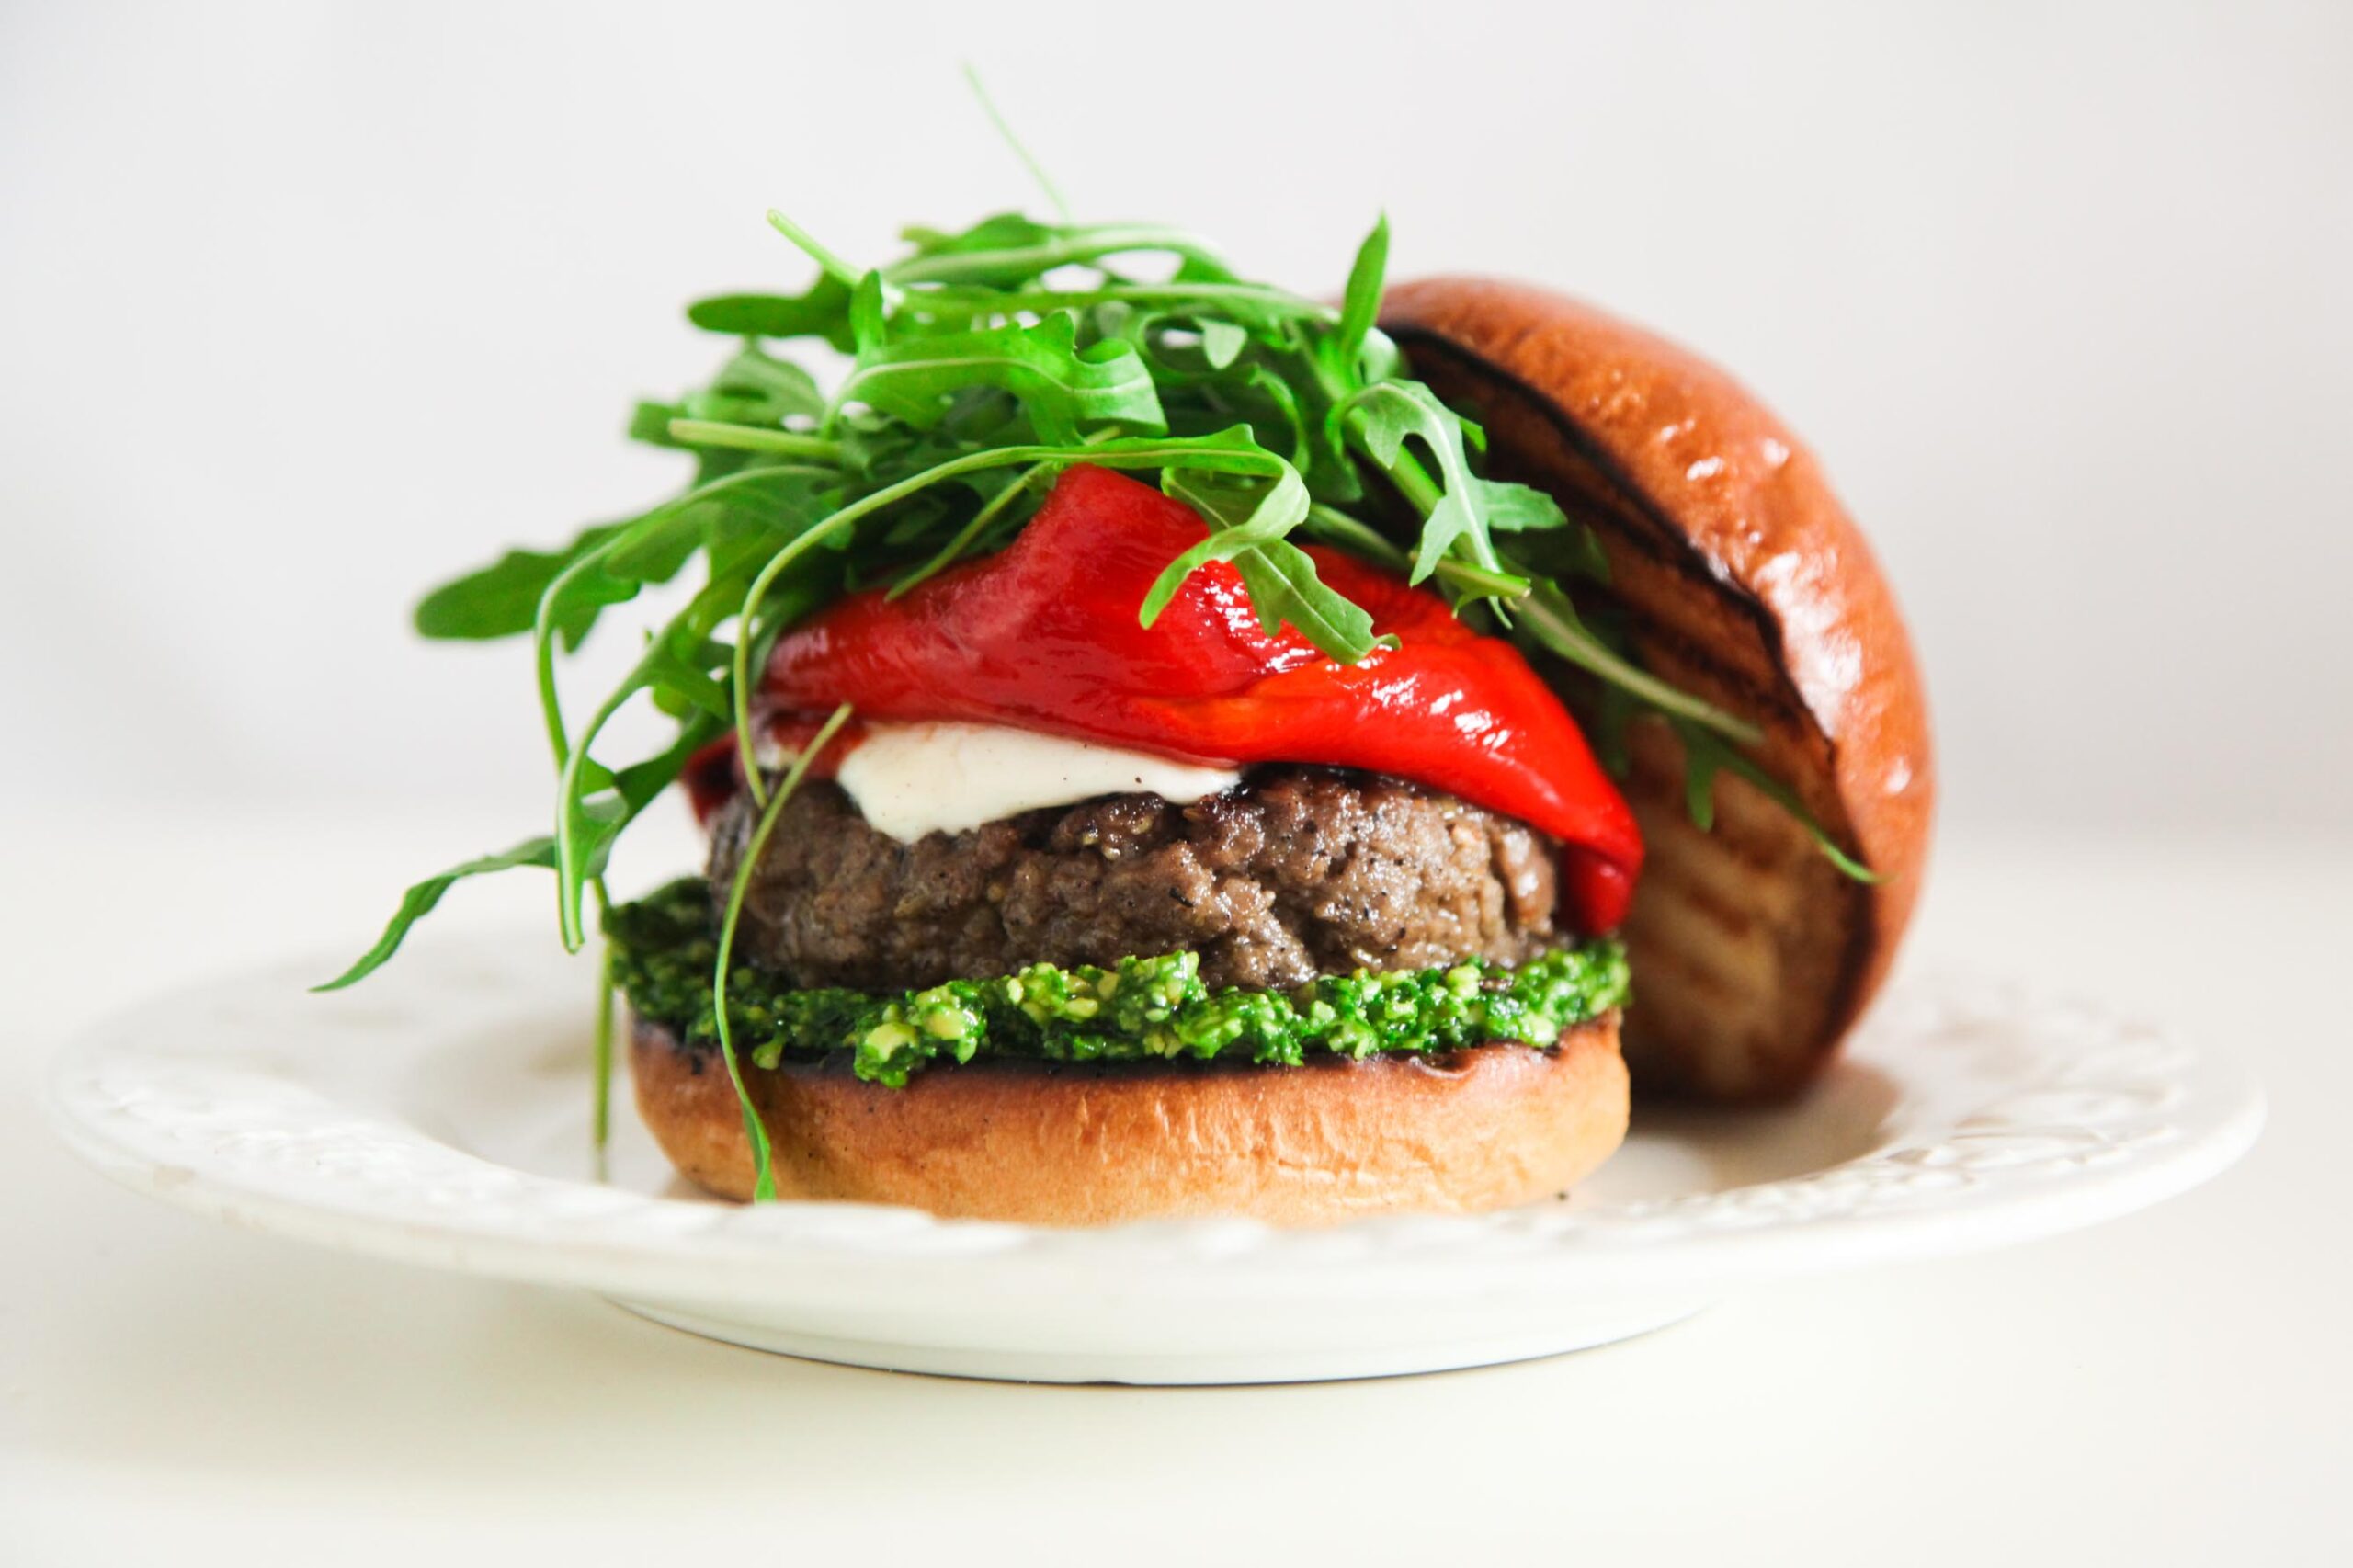 Super Simple and Incredibly Yummy Italian Burger - Berries &amp; Spice